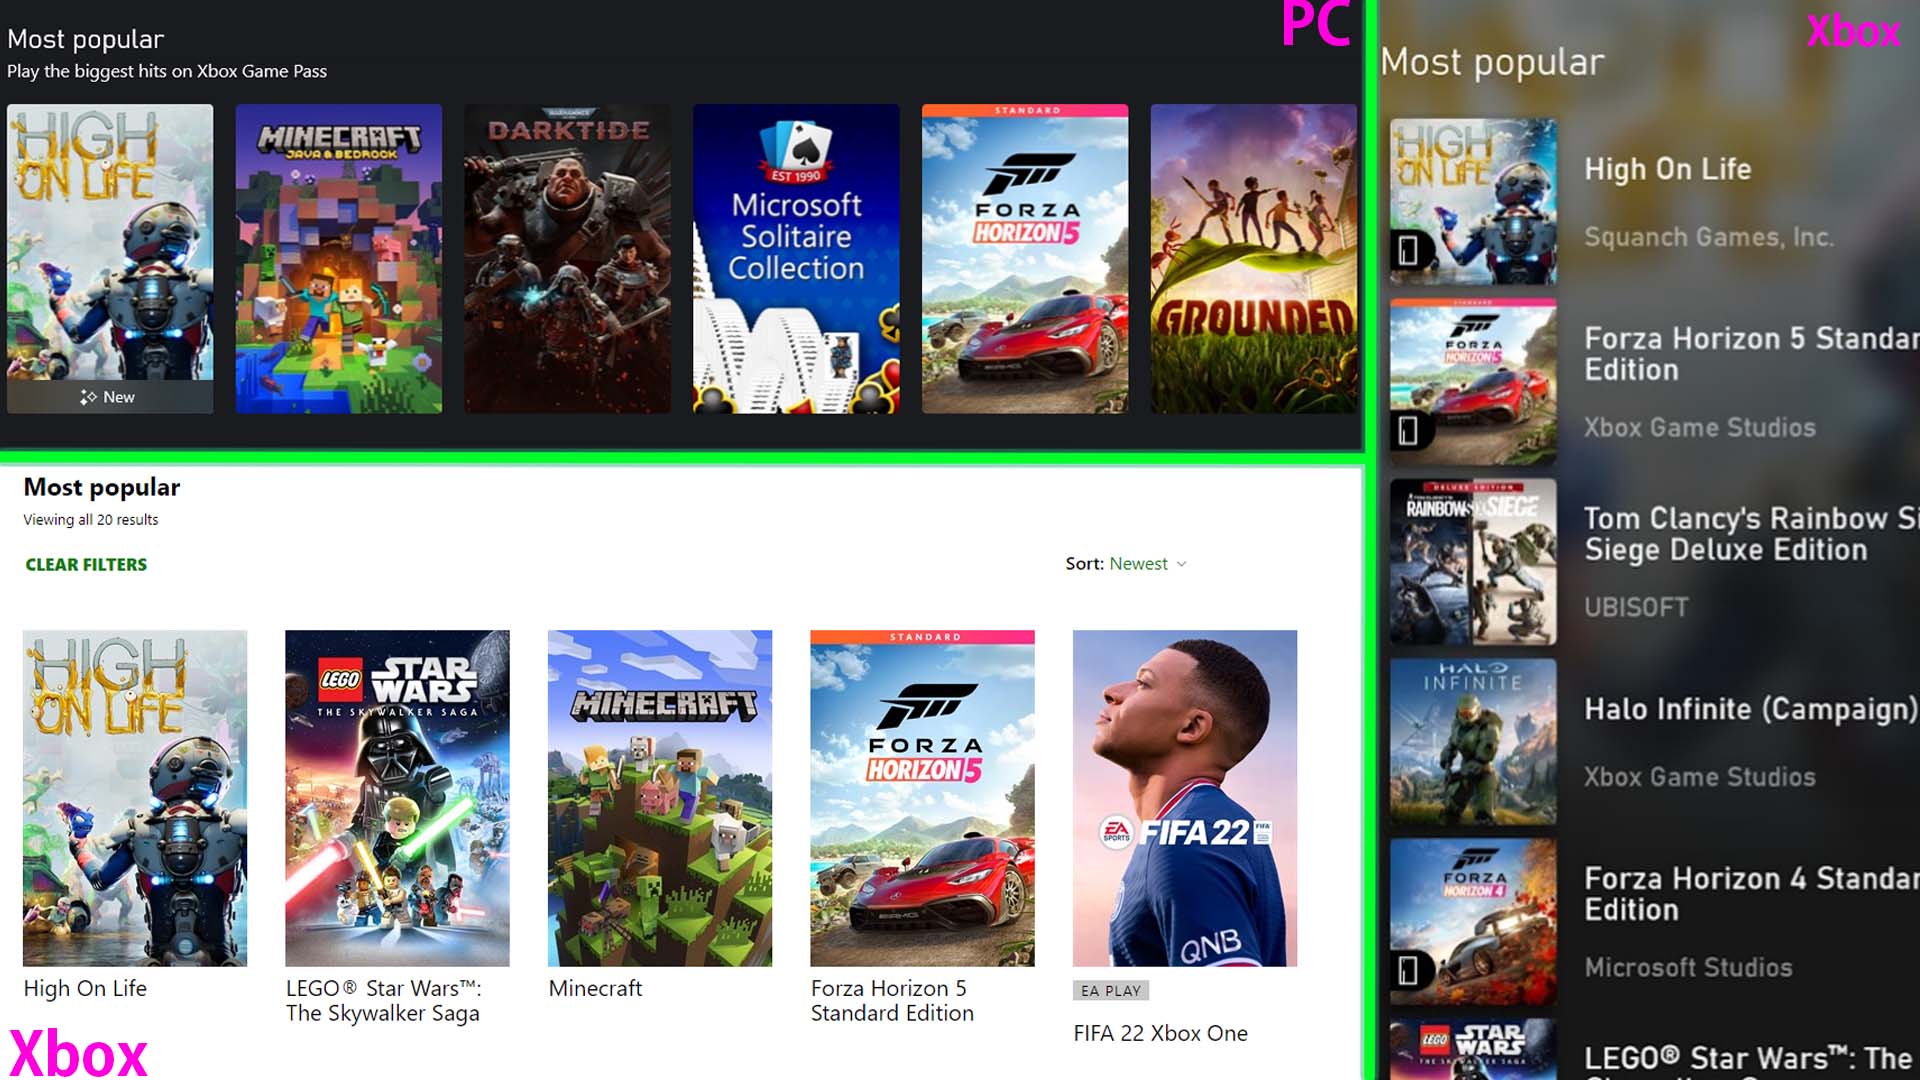 High on Life is now the most popular thing on Xbox Game Pass